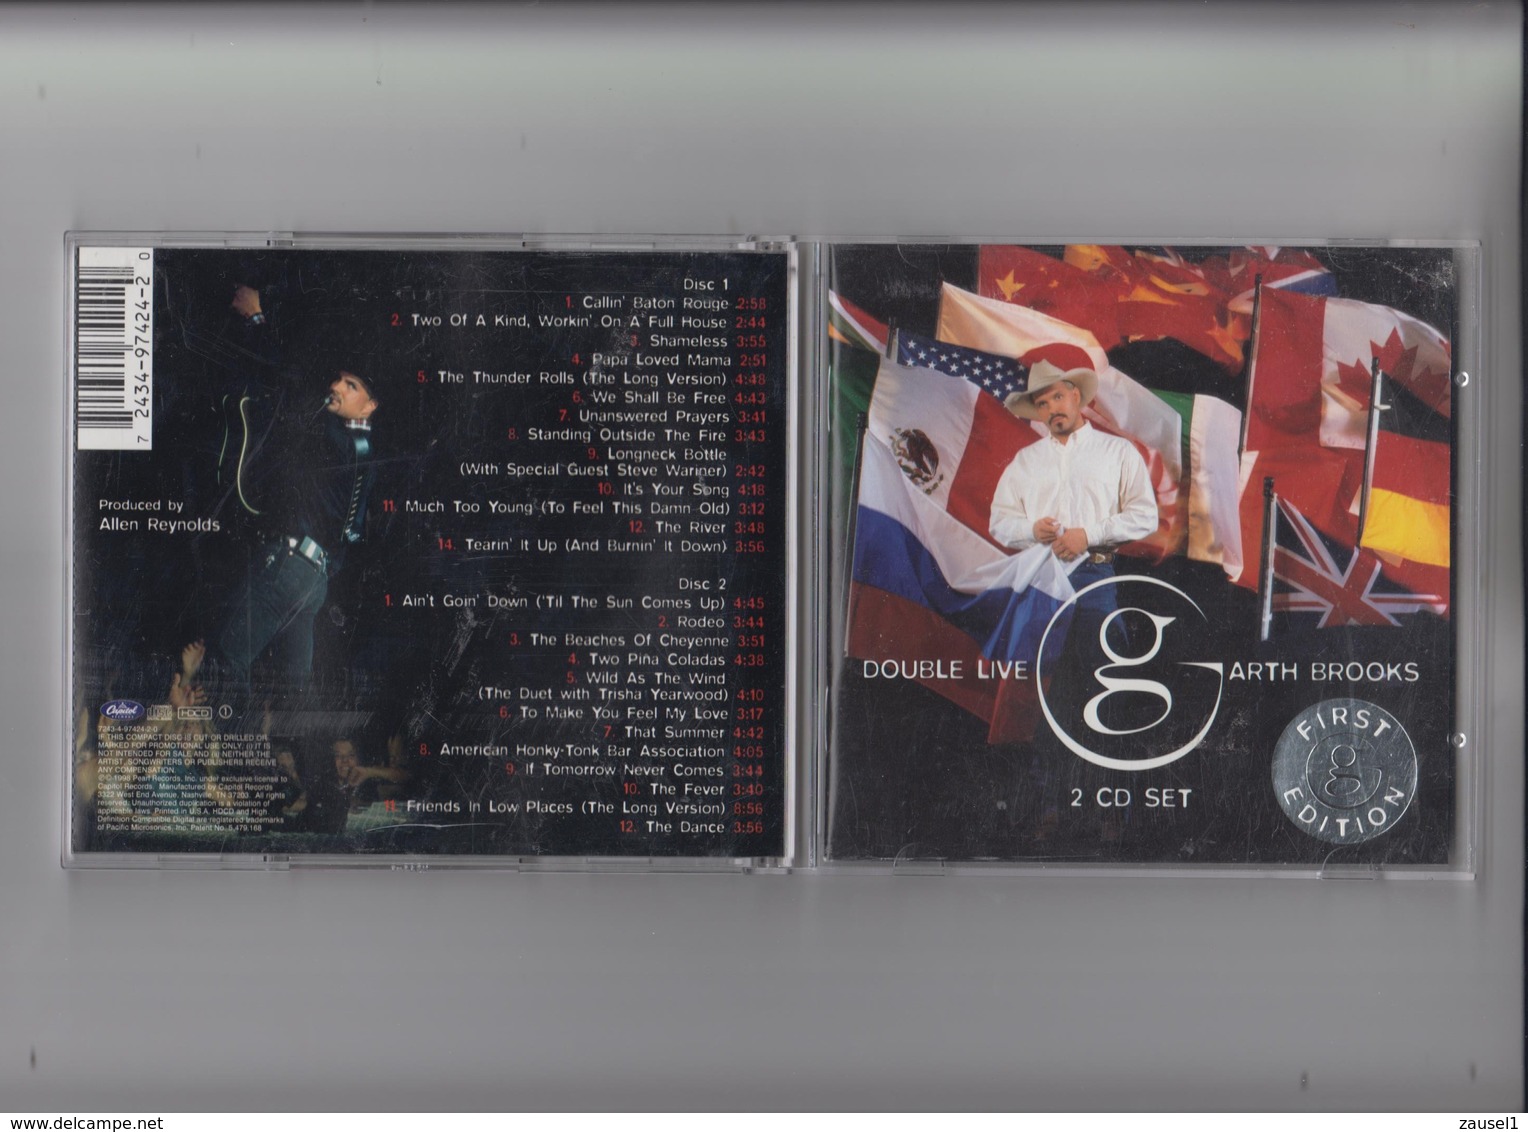 Garth Brooks - Double Live - Limited First Edition - 2 Original CDs - Country & Folk